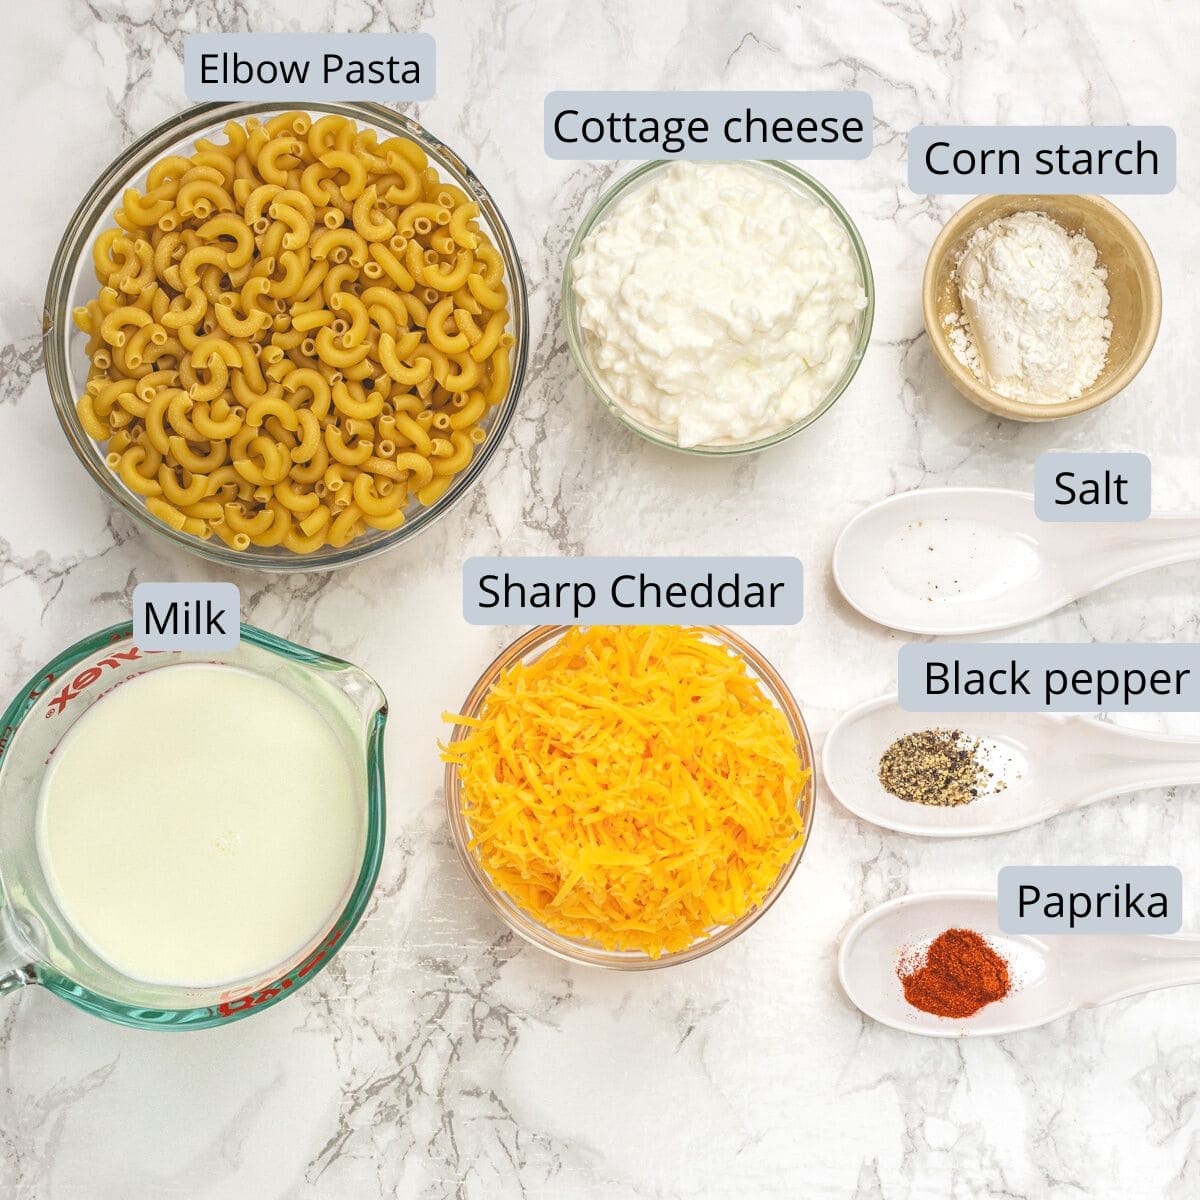 Ingredients for cottage cheese mac n cheese in bowls and spoons with labels.